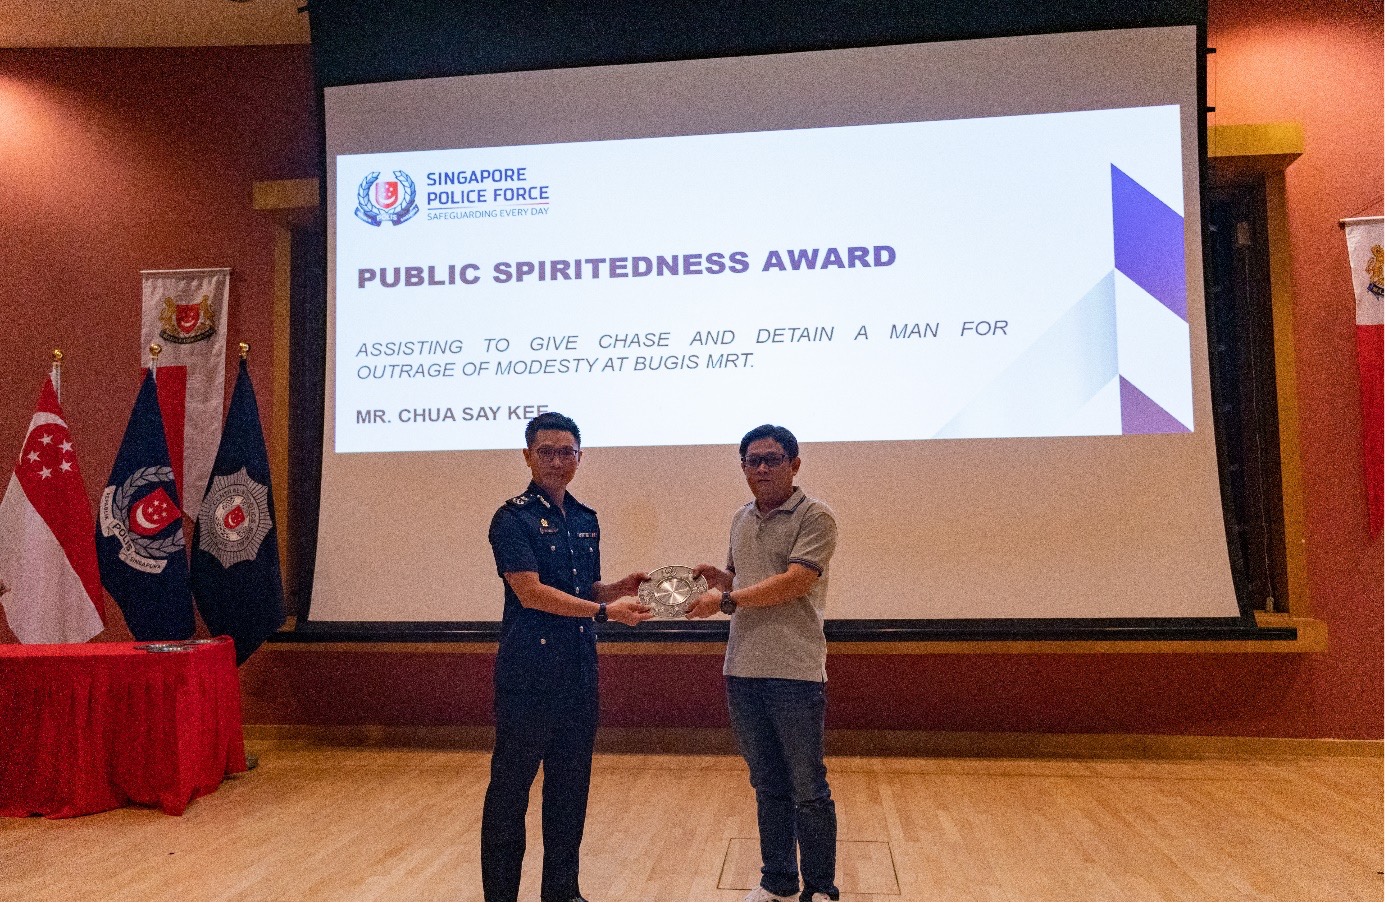 20220818_eleven_members_of_the_public_presented_with_public_spiritedness_award3